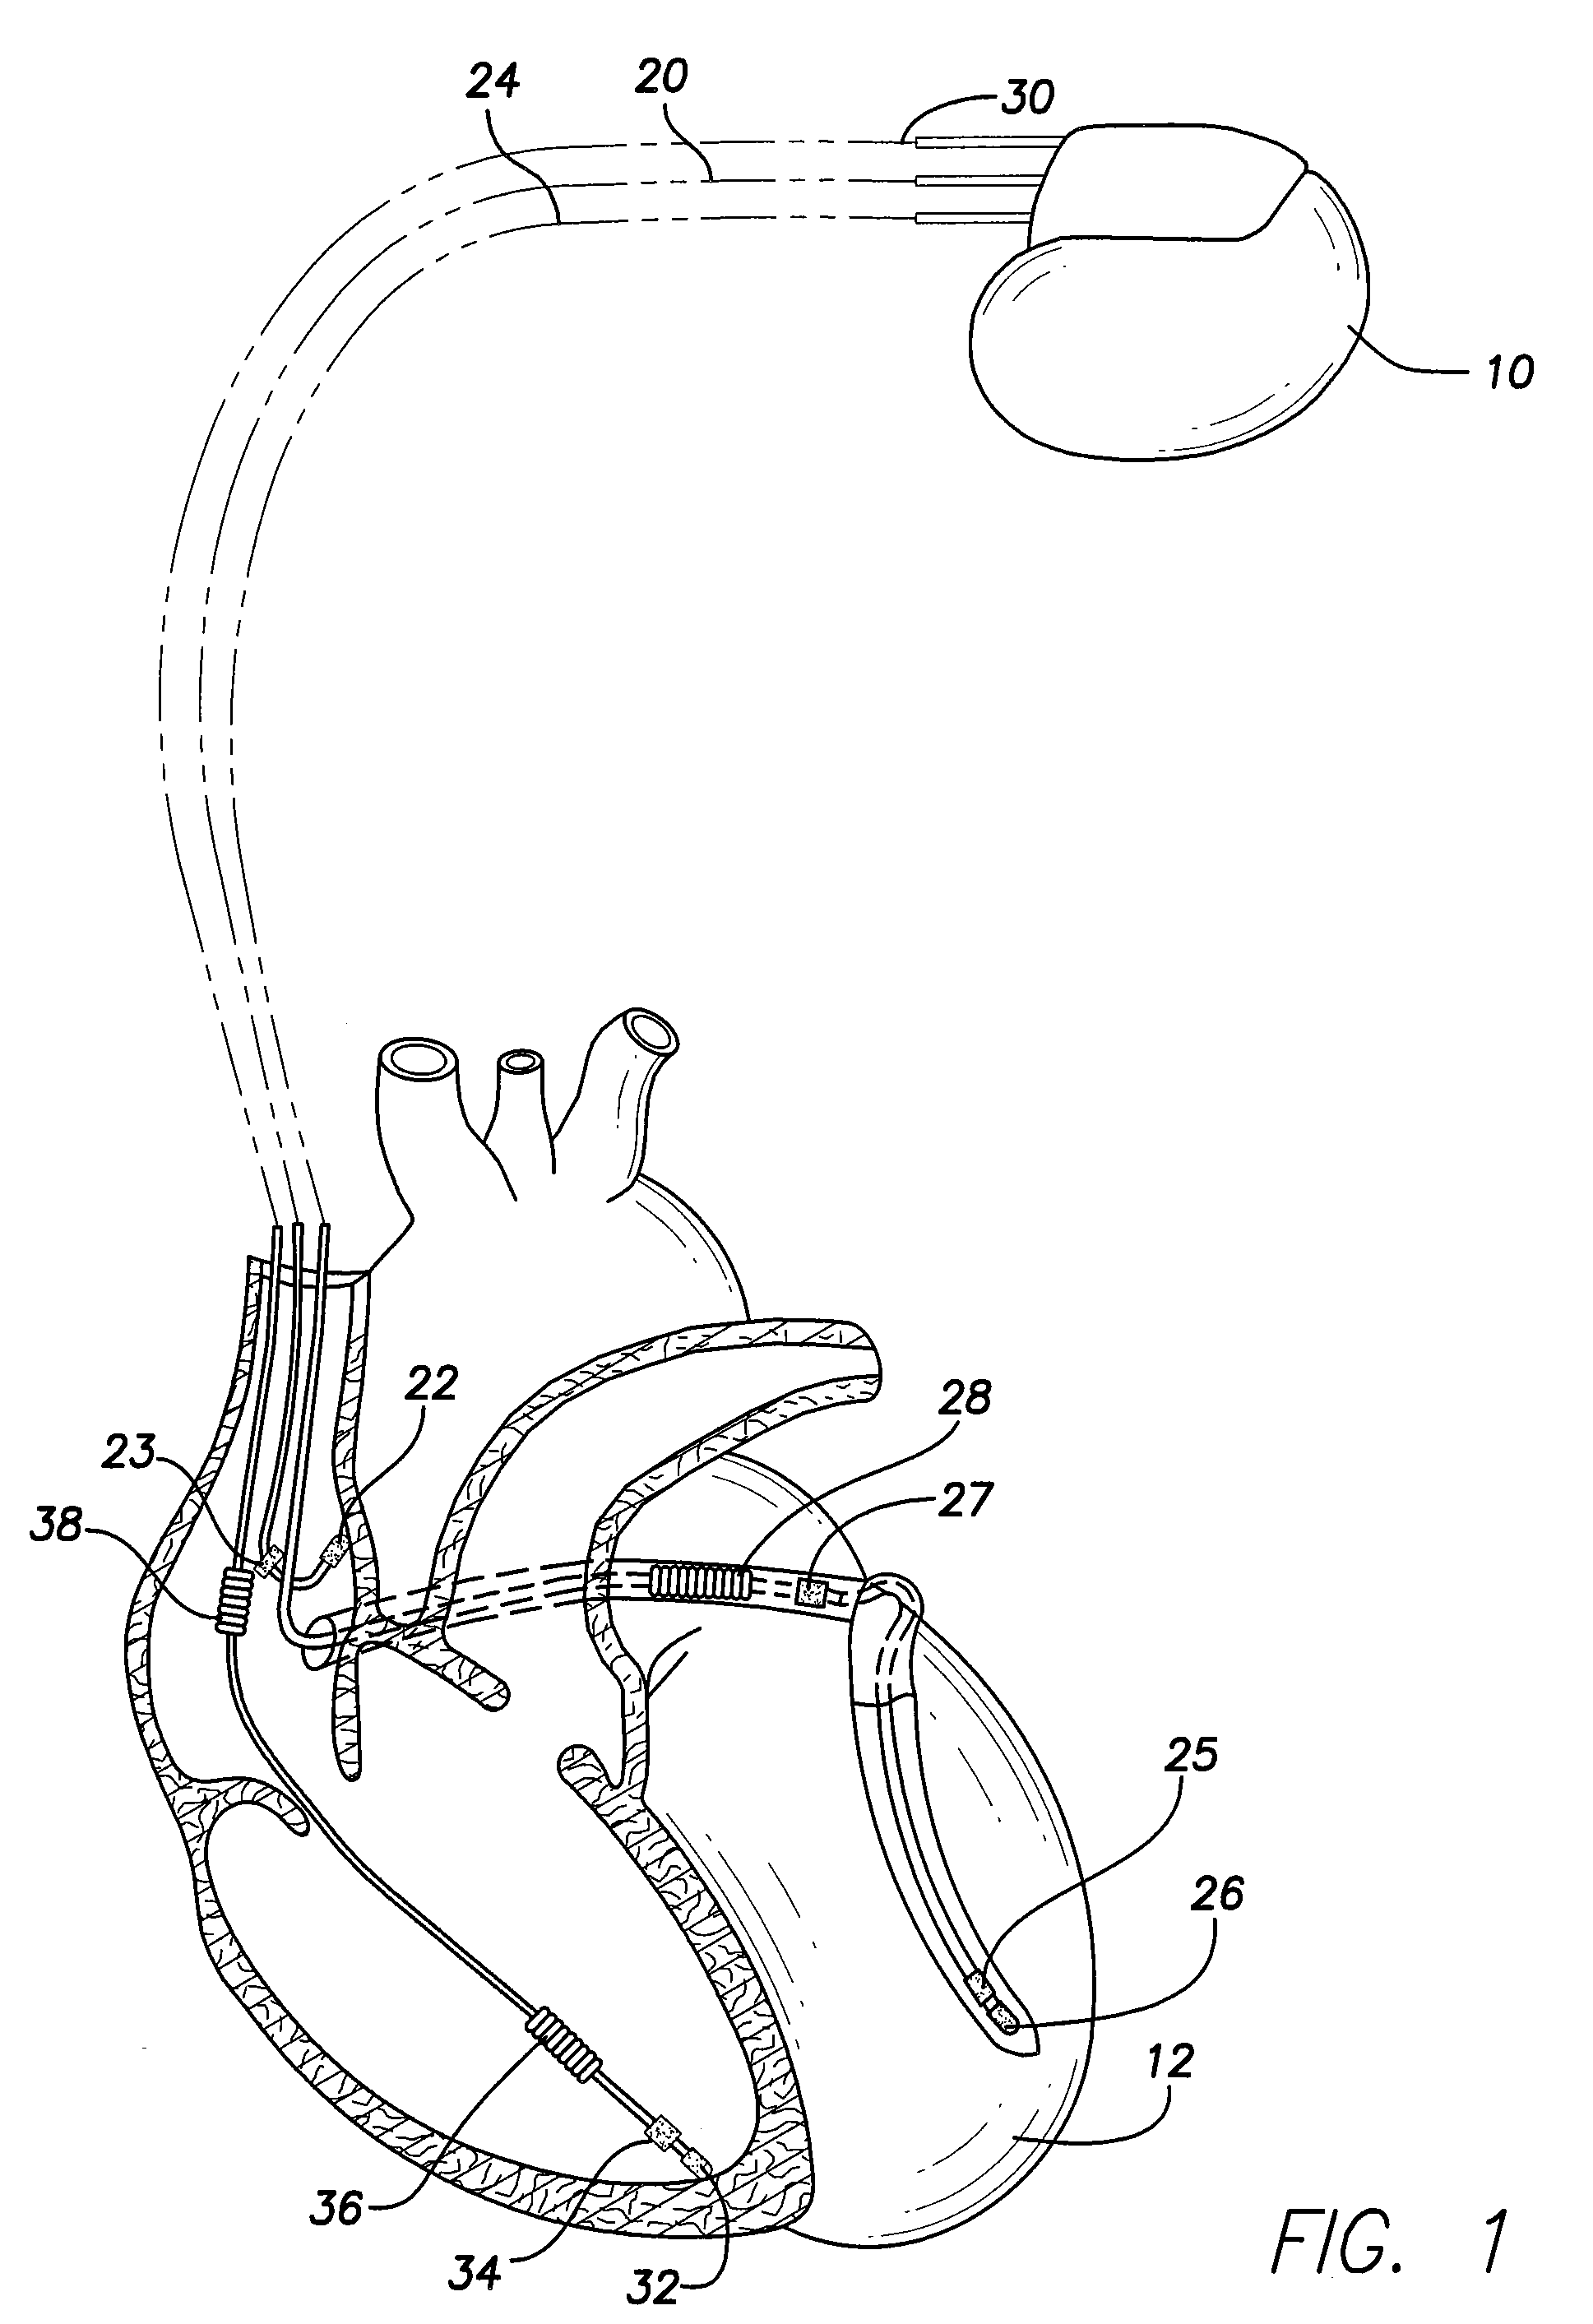 Methods and systems for implementing an SCR topology in a high voltage switching circuit